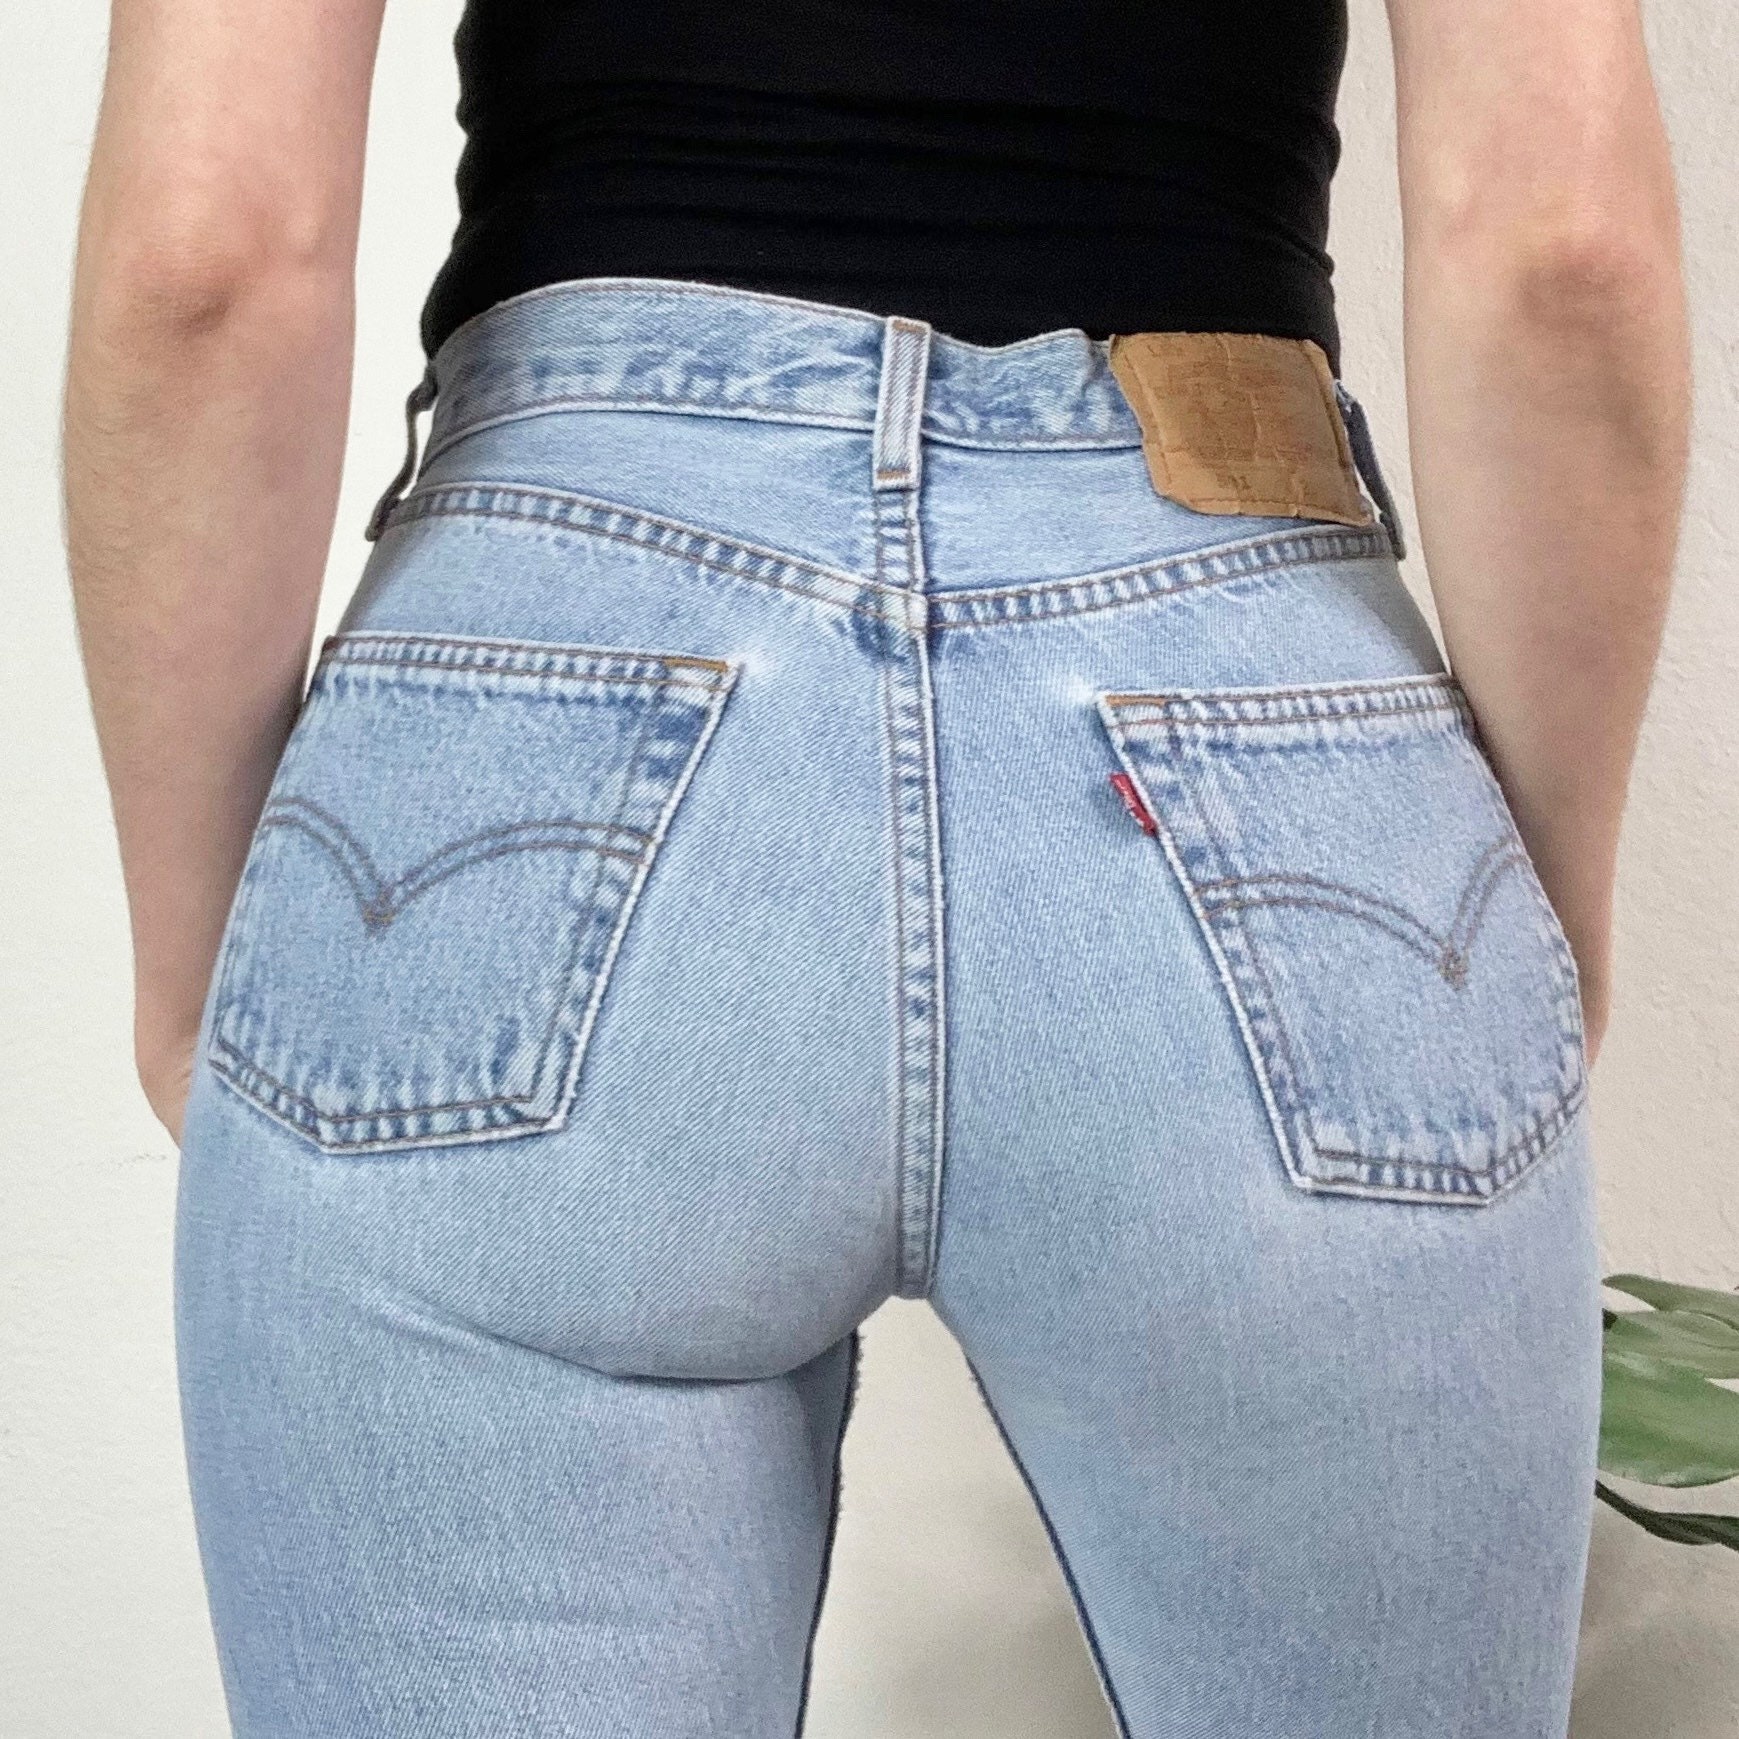 26+ Levis 501 Sewing Pattern - LiannaHolden